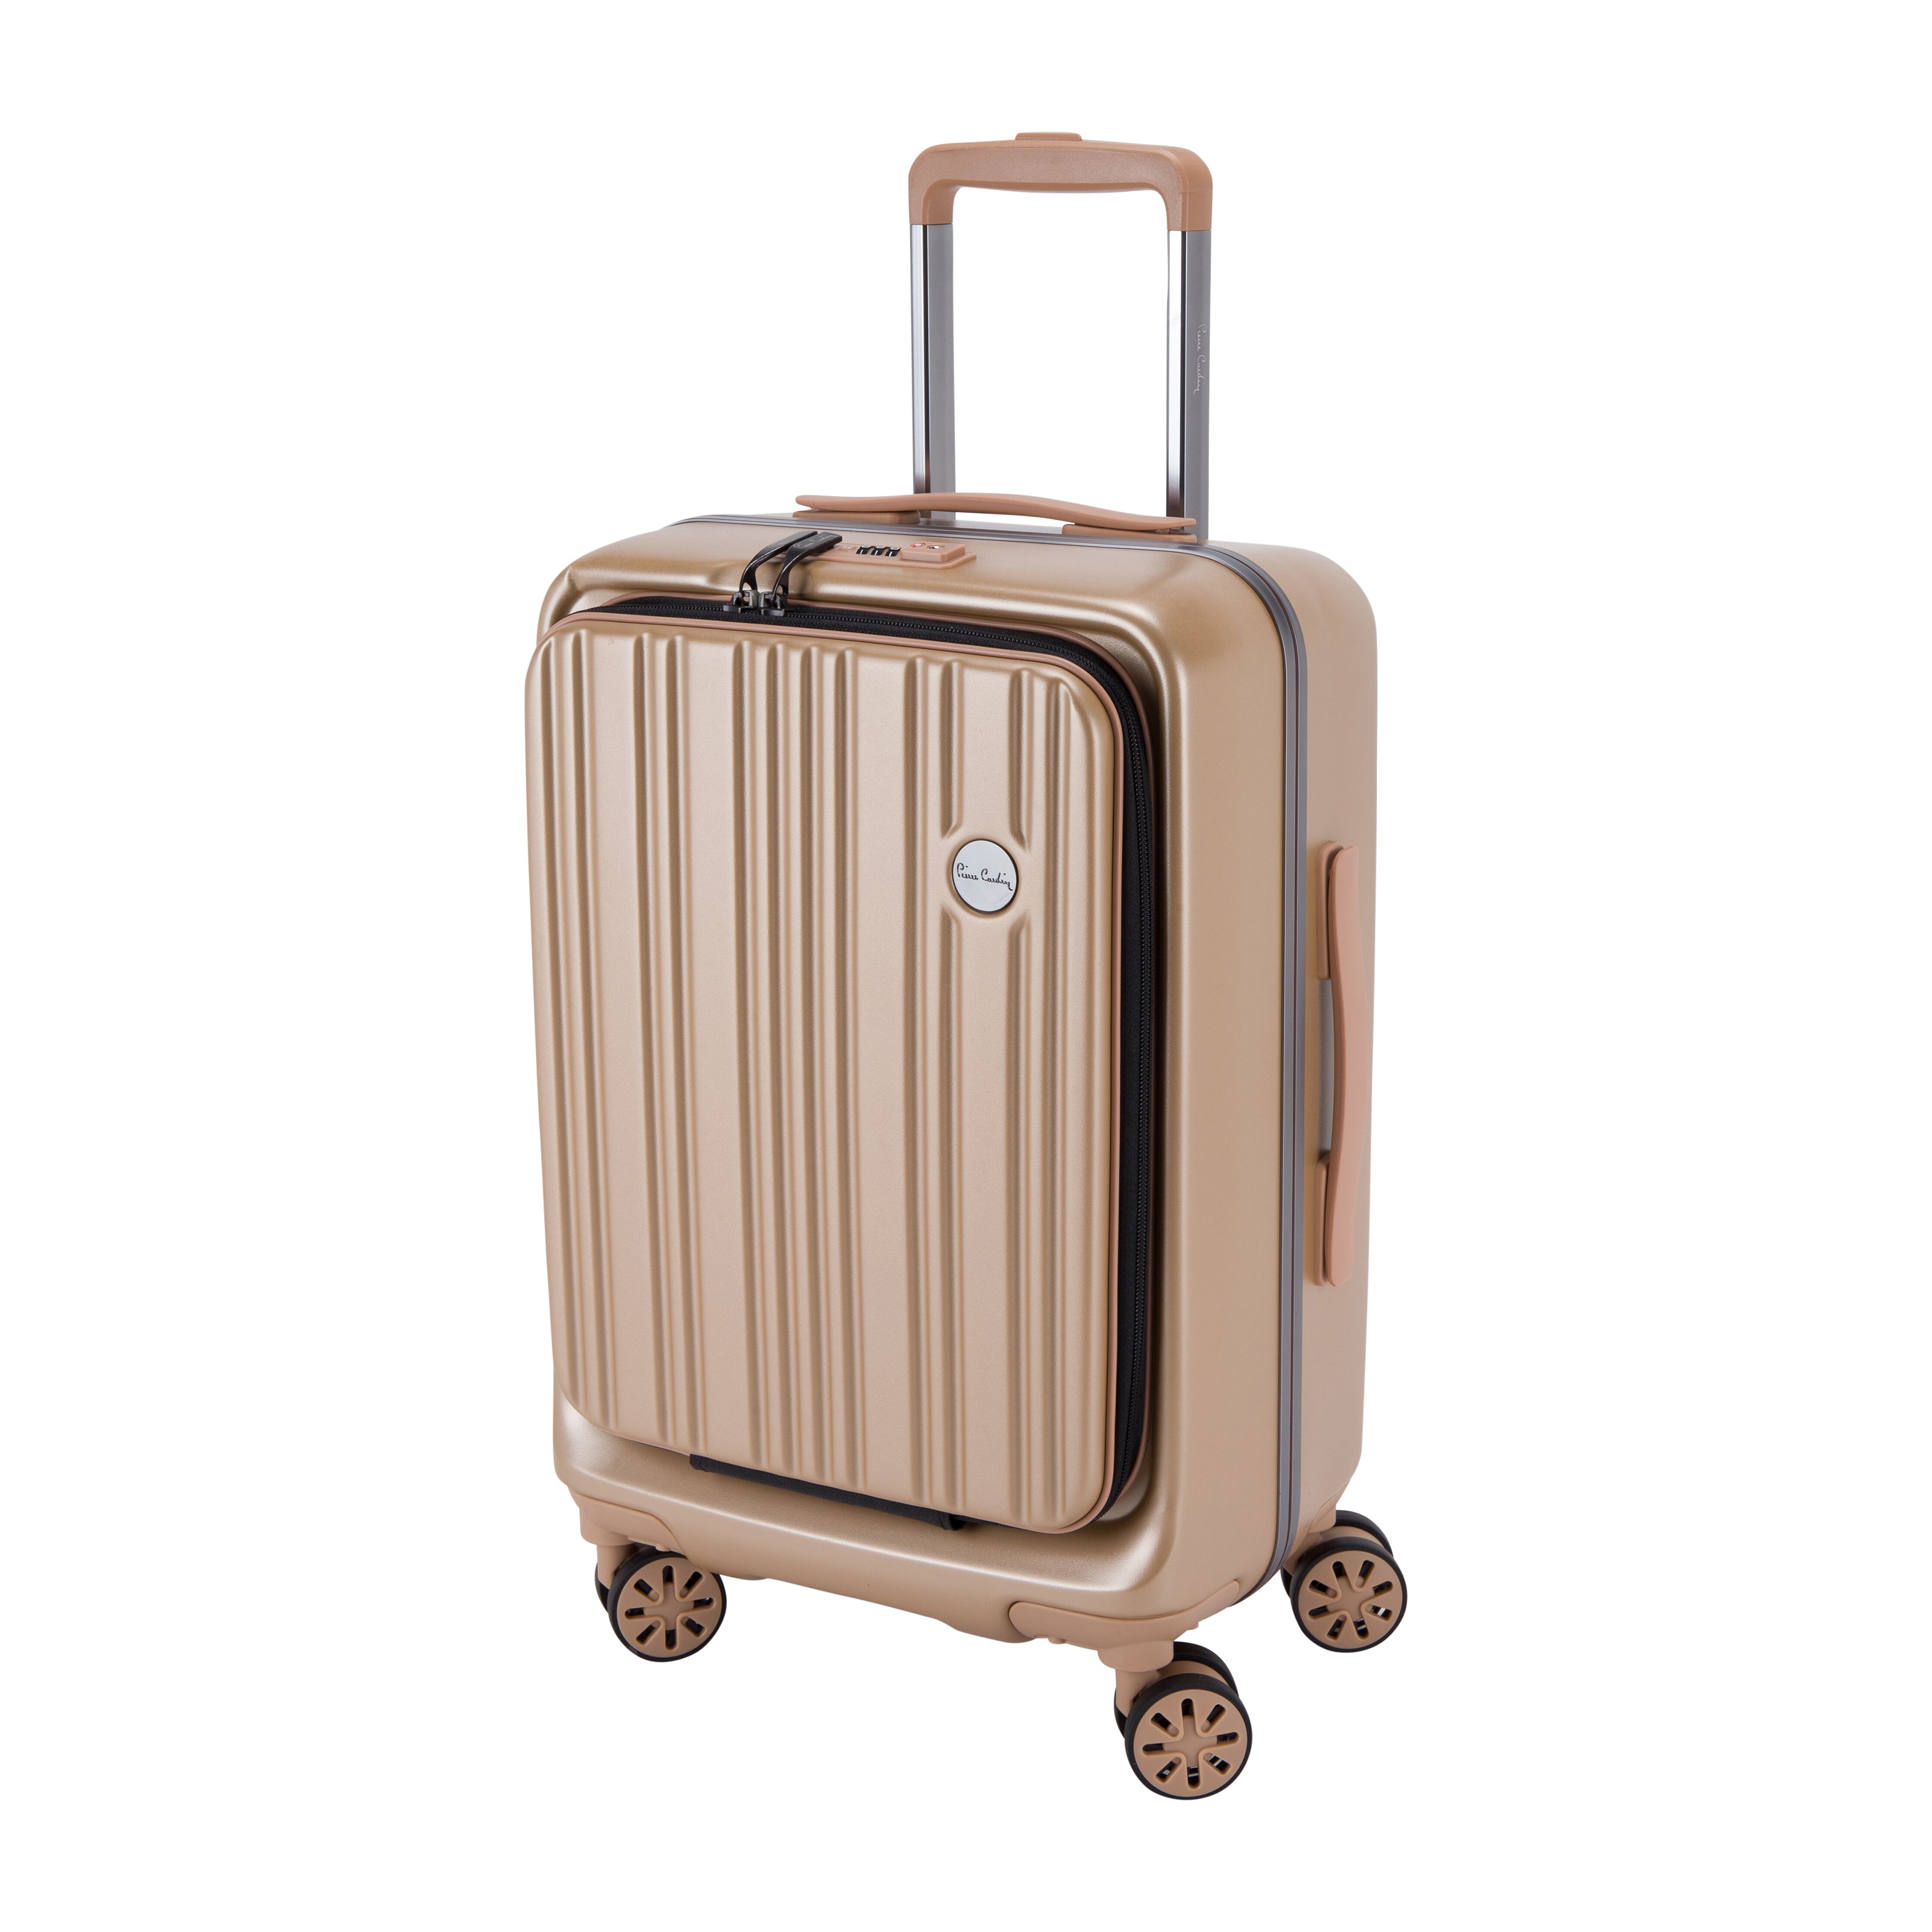 Pierre Cardin Suitcase Front Pocket Design Carry On, Champagne